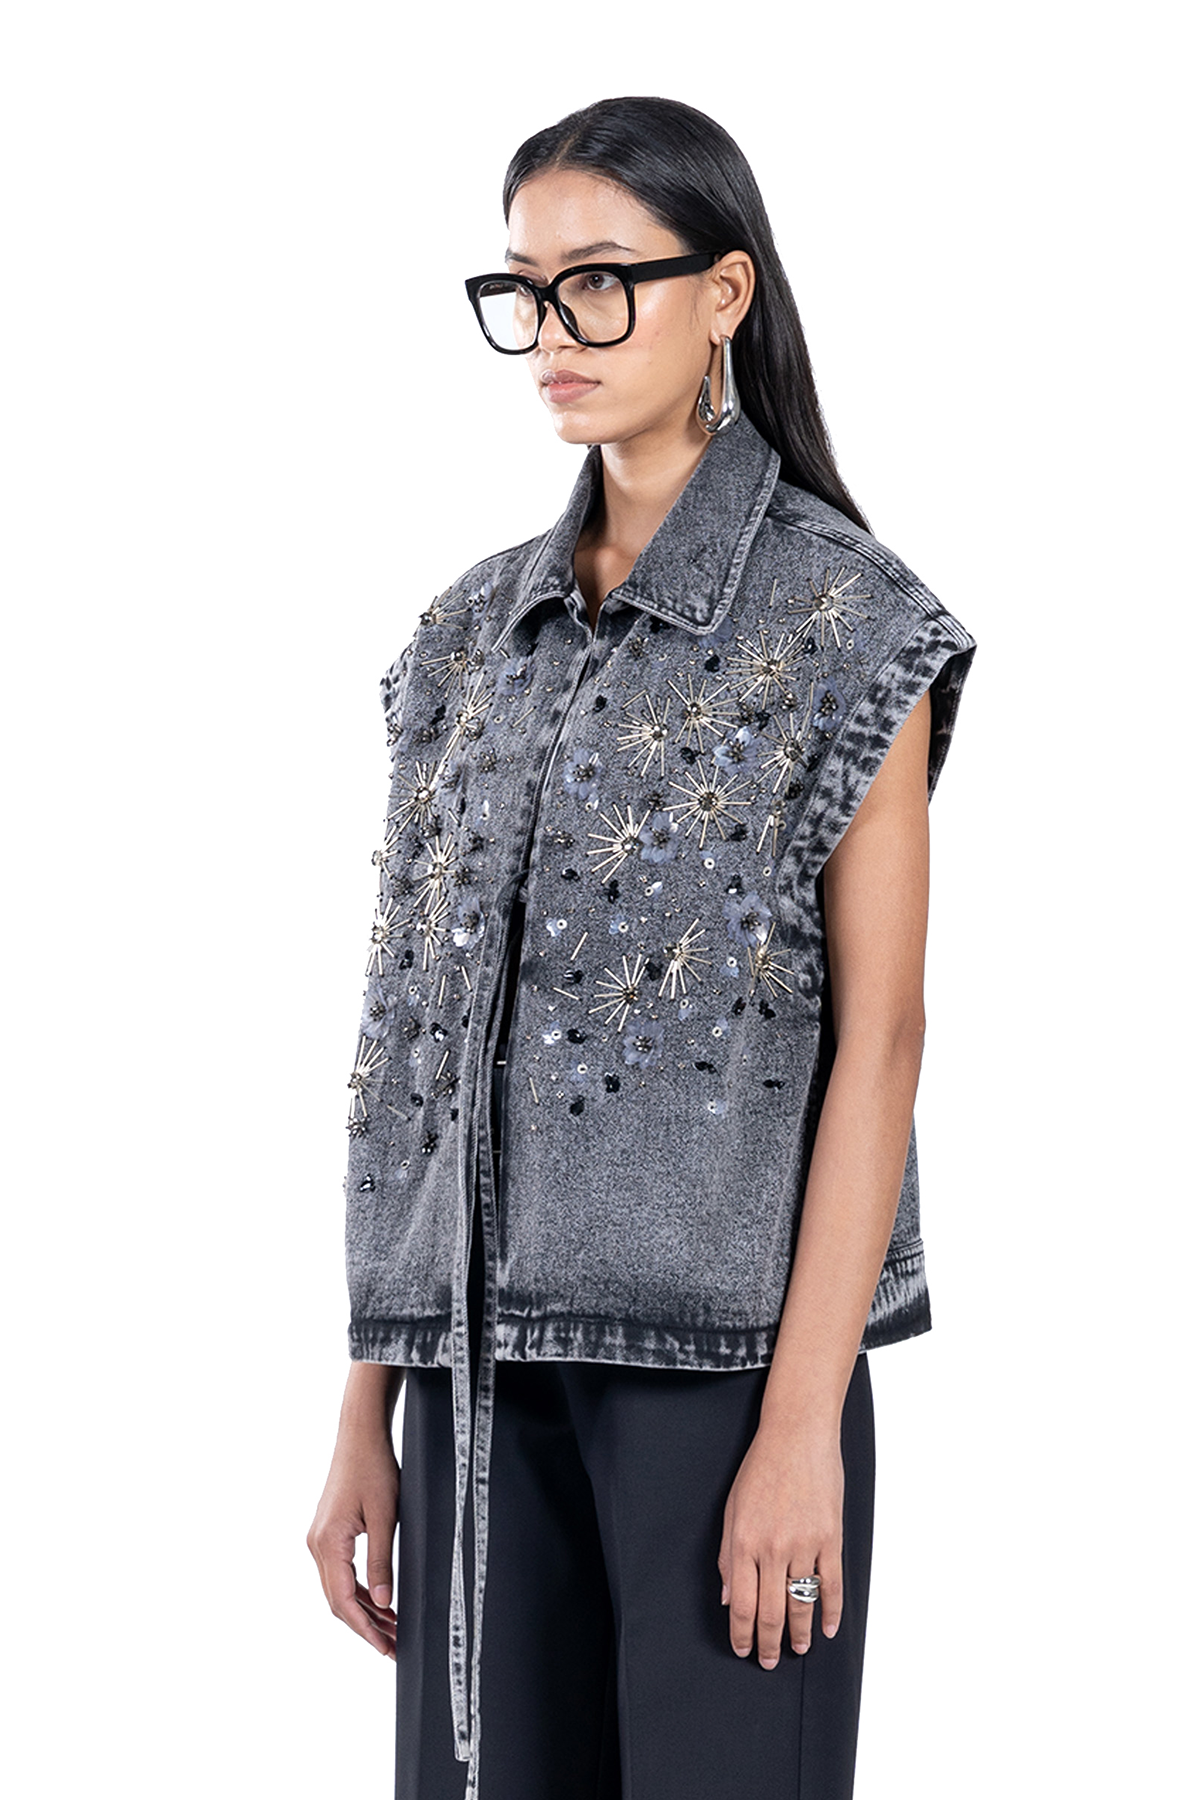 HANDCRAFTED CRYSTAL TIE-UP VEST